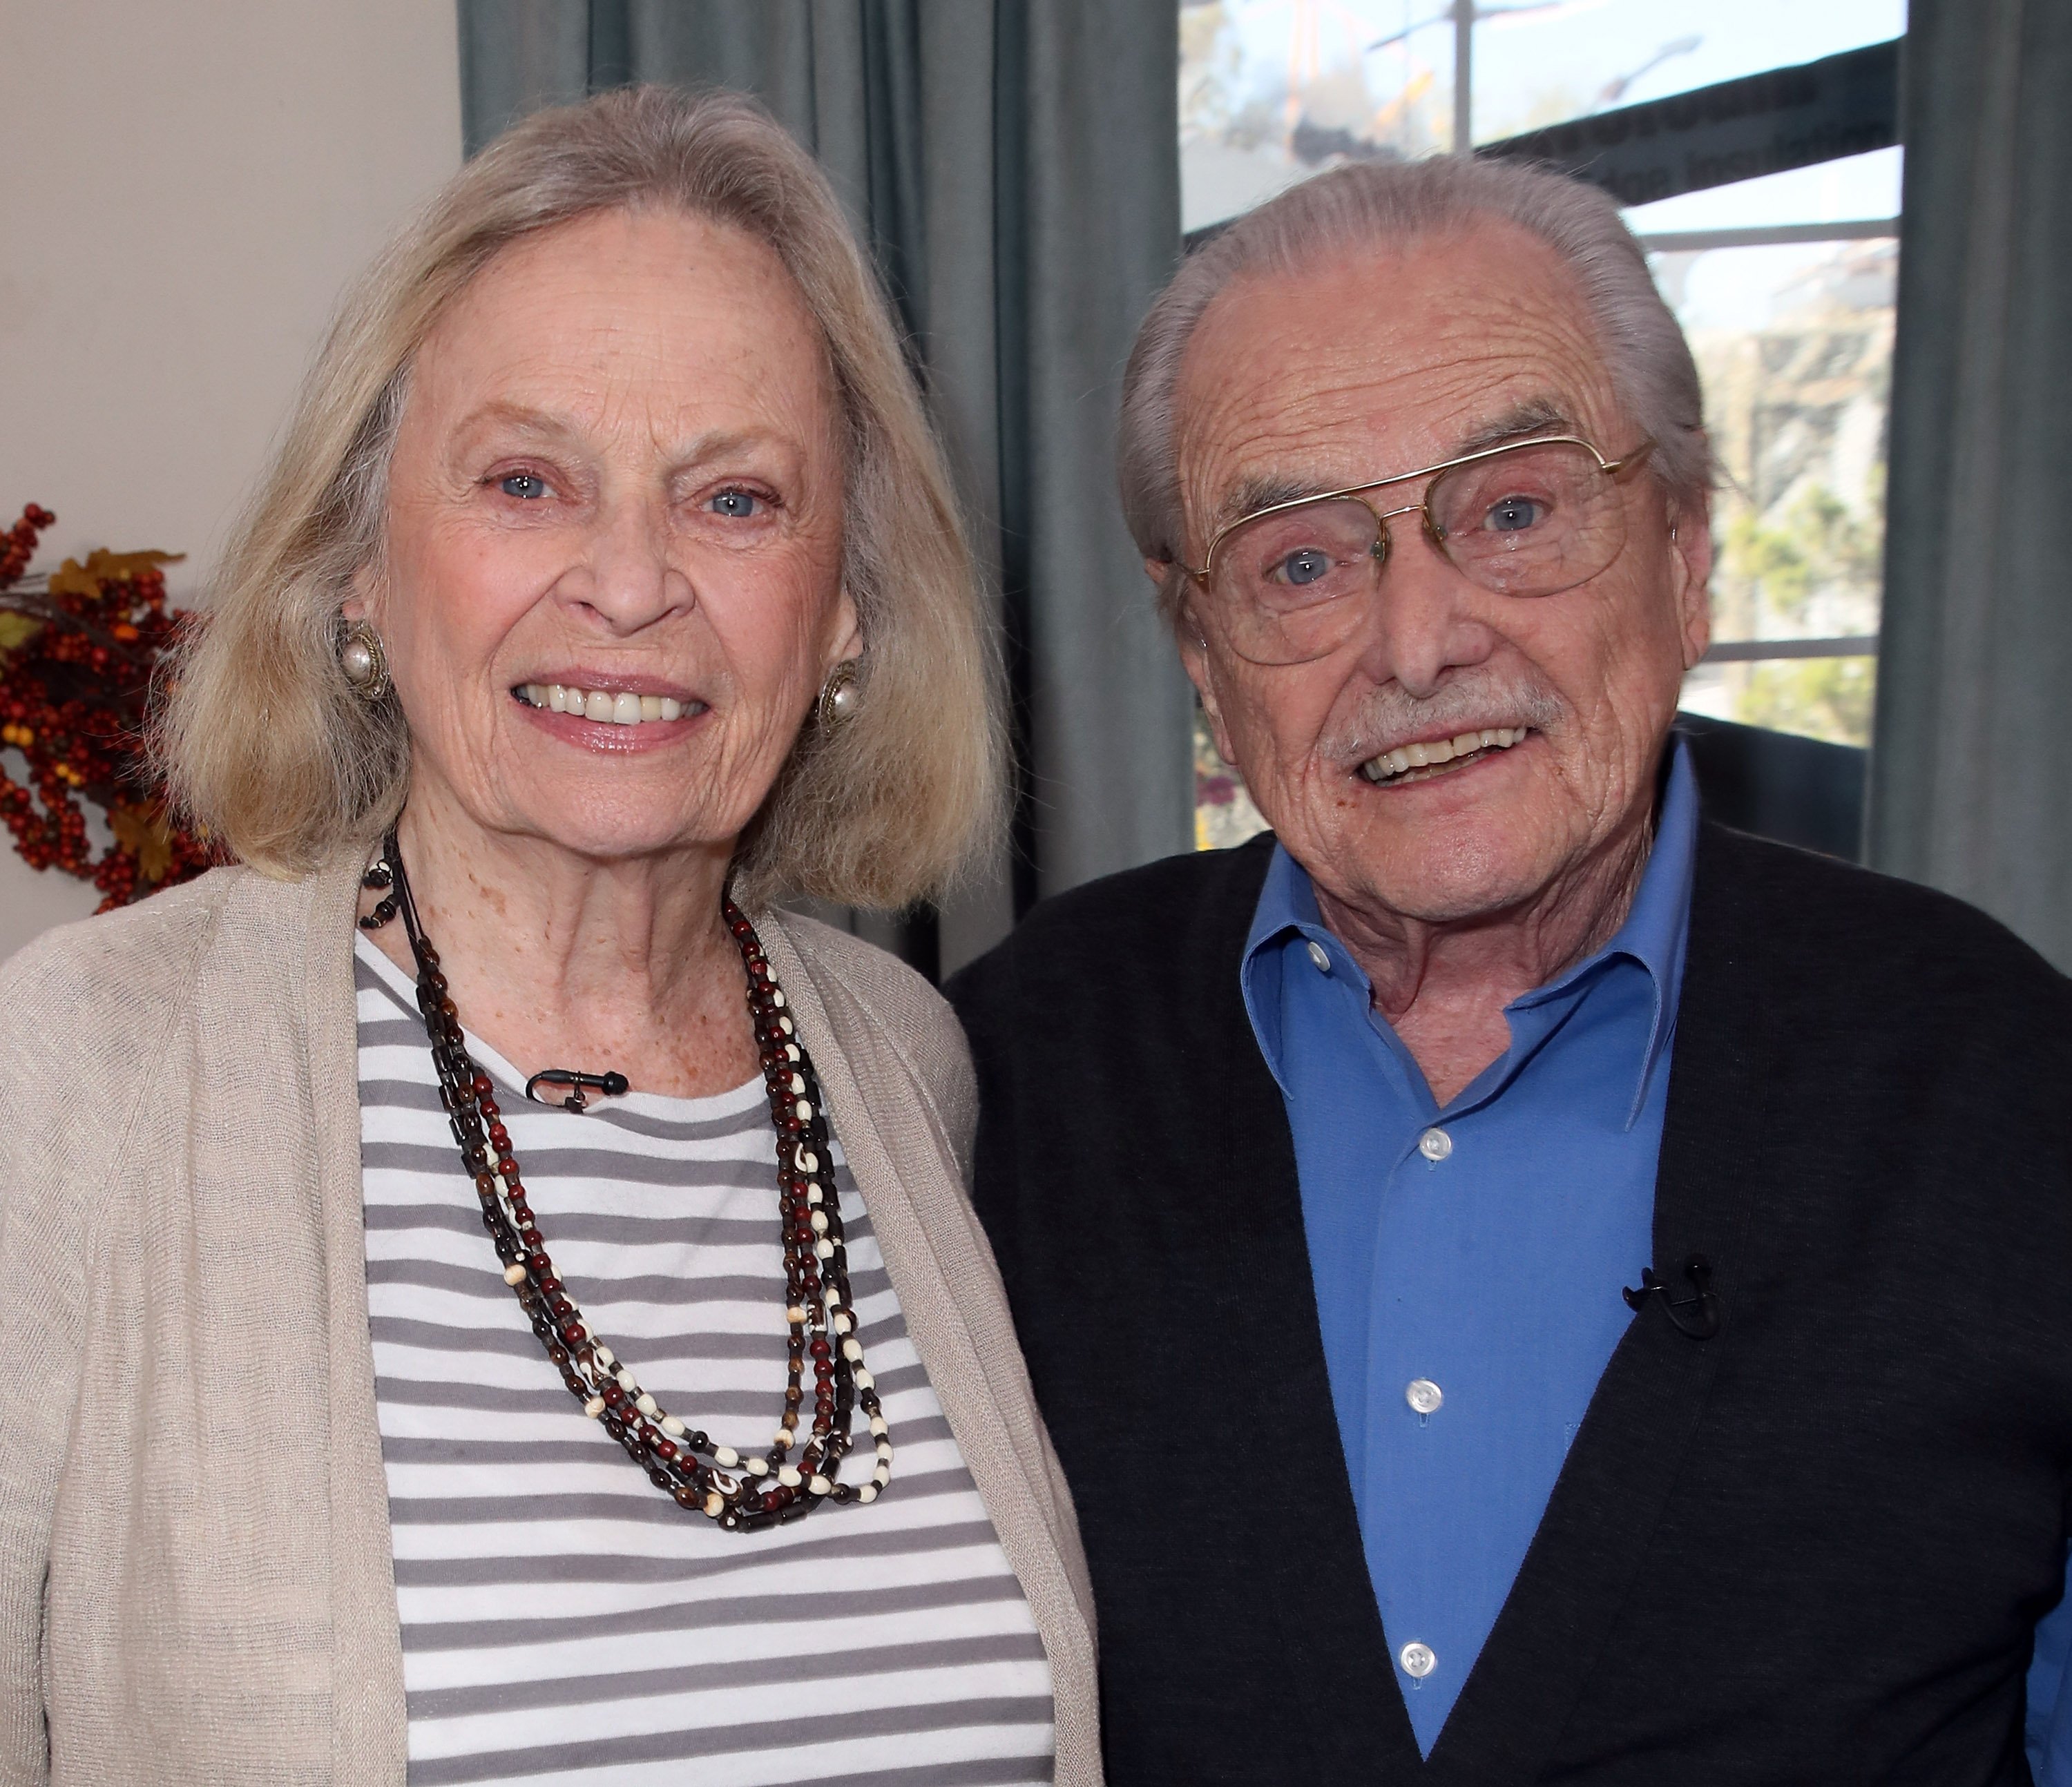 Bonnie Bartlett and husband William Daniels visit Hallmark's "Home & Family" on October 25, 2017. | Source: Getty Images